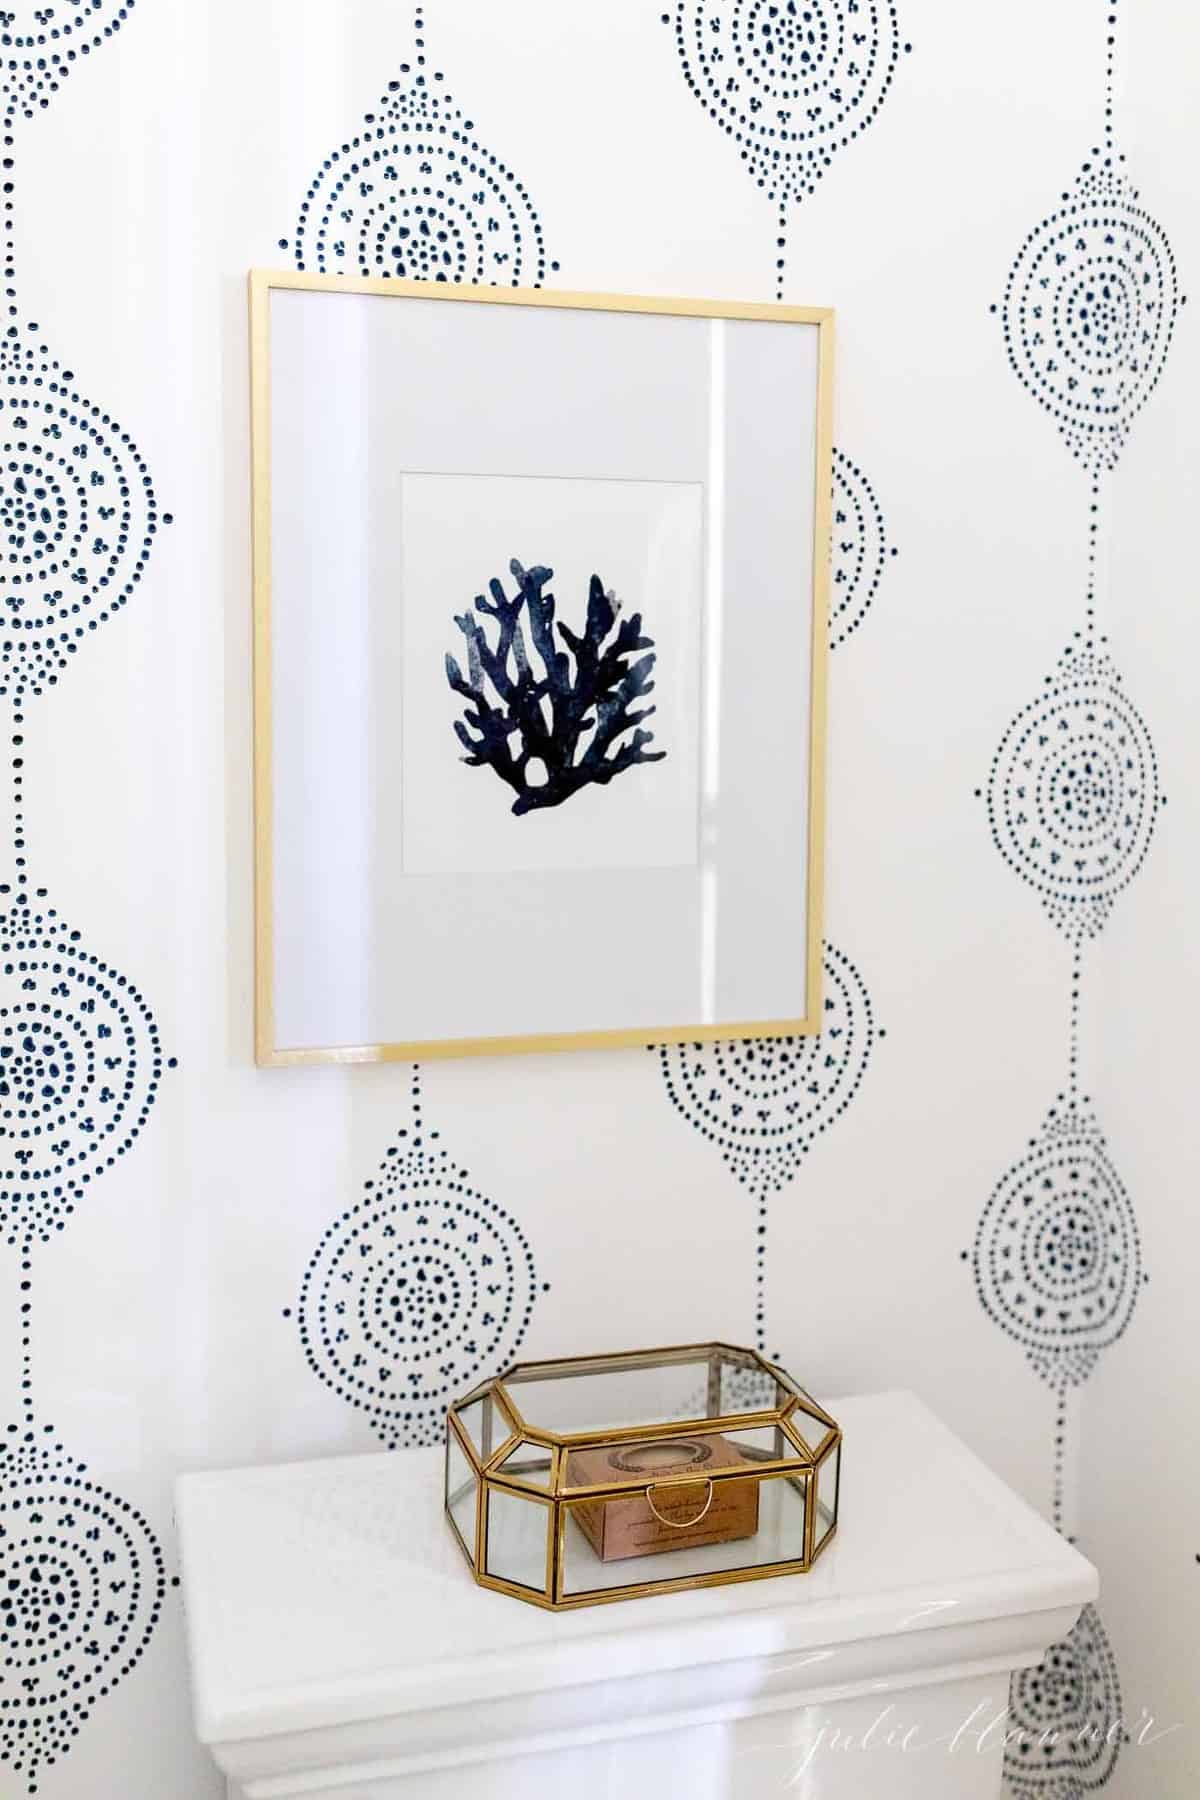 Blue and white patterned bathroom wallpaper with seashell art over the toilet.